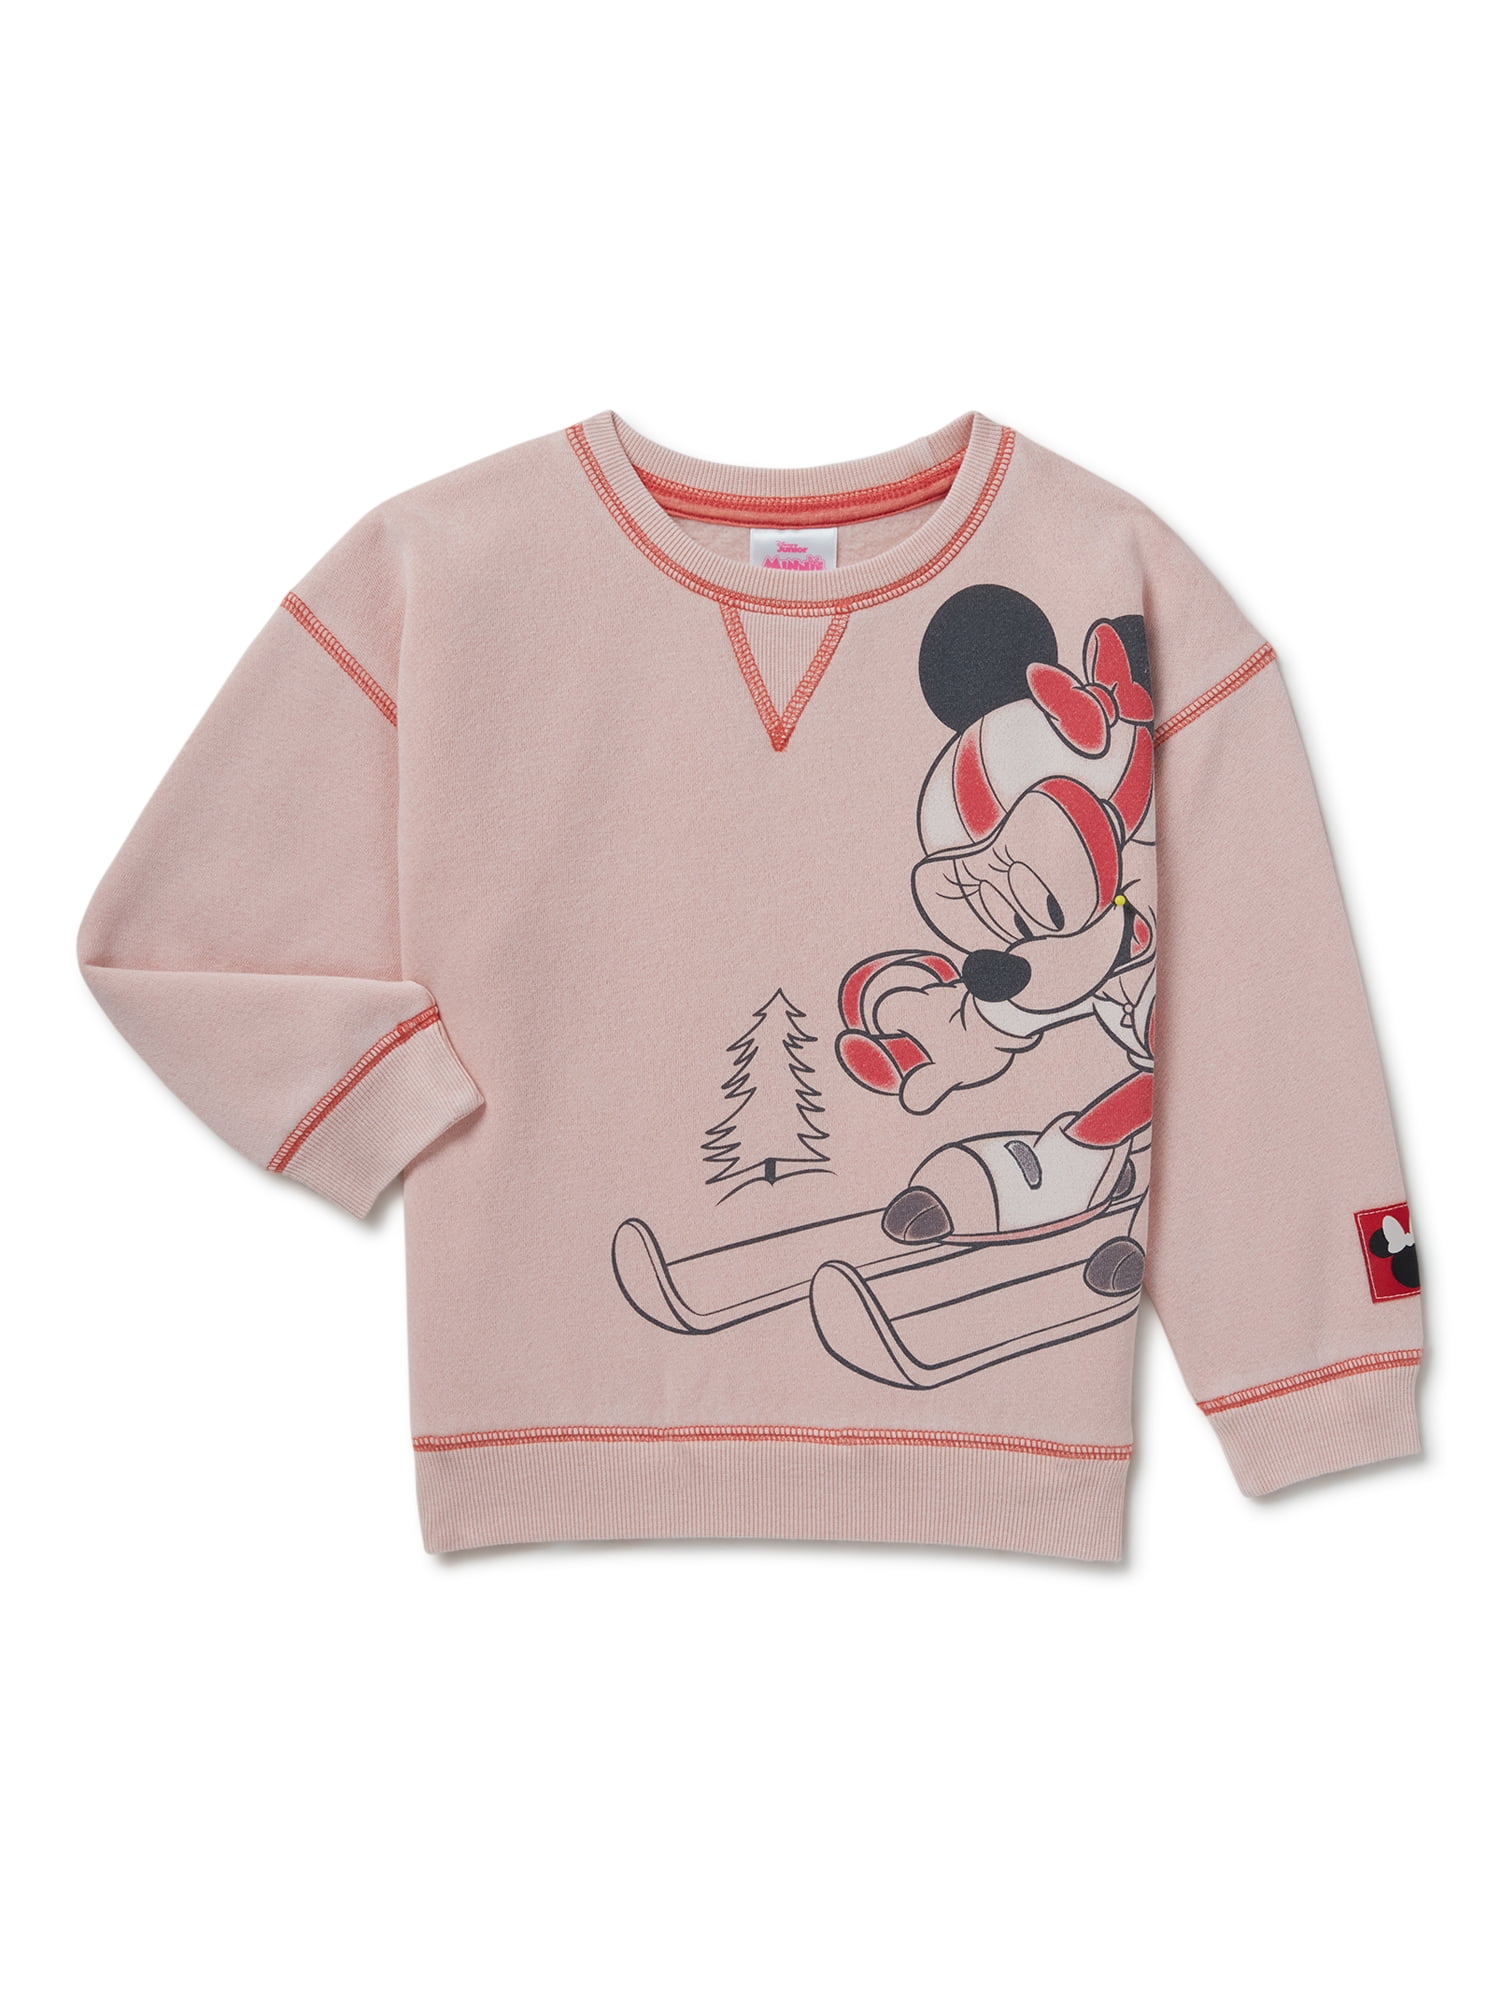 Minnie Mouse Baby and Toddler Girl Crewneck Sweatshirt, Sizes 12